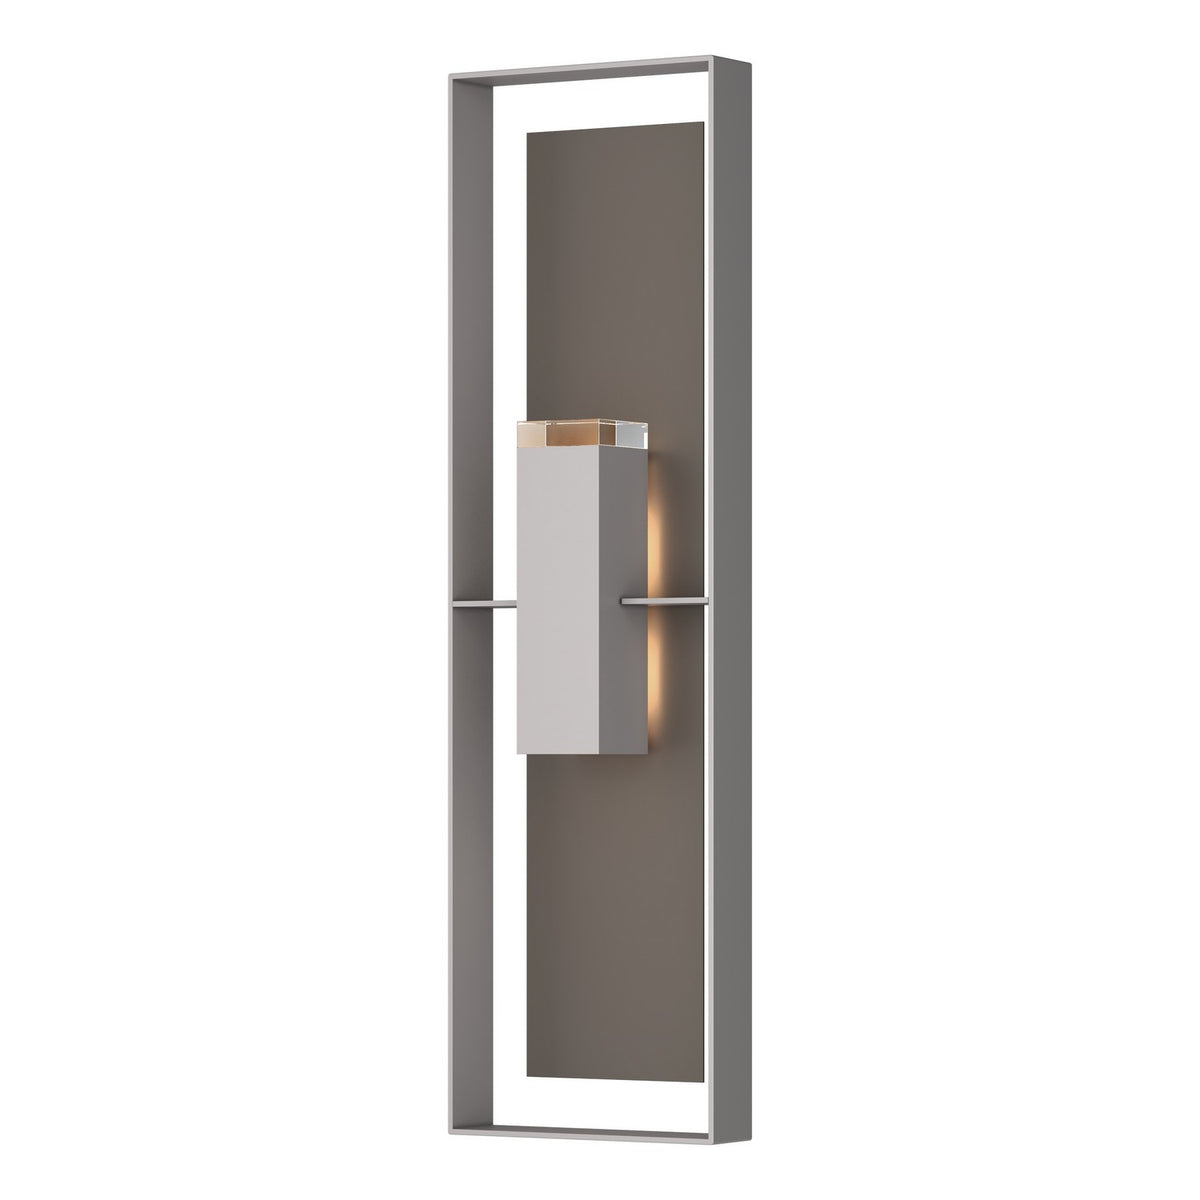 Hubbardton Forge - 302608-SKT-78-77-ZM0736 - Two Light Outdoor Wall Sconce - Shadow Box - Coastal Burnished Steel